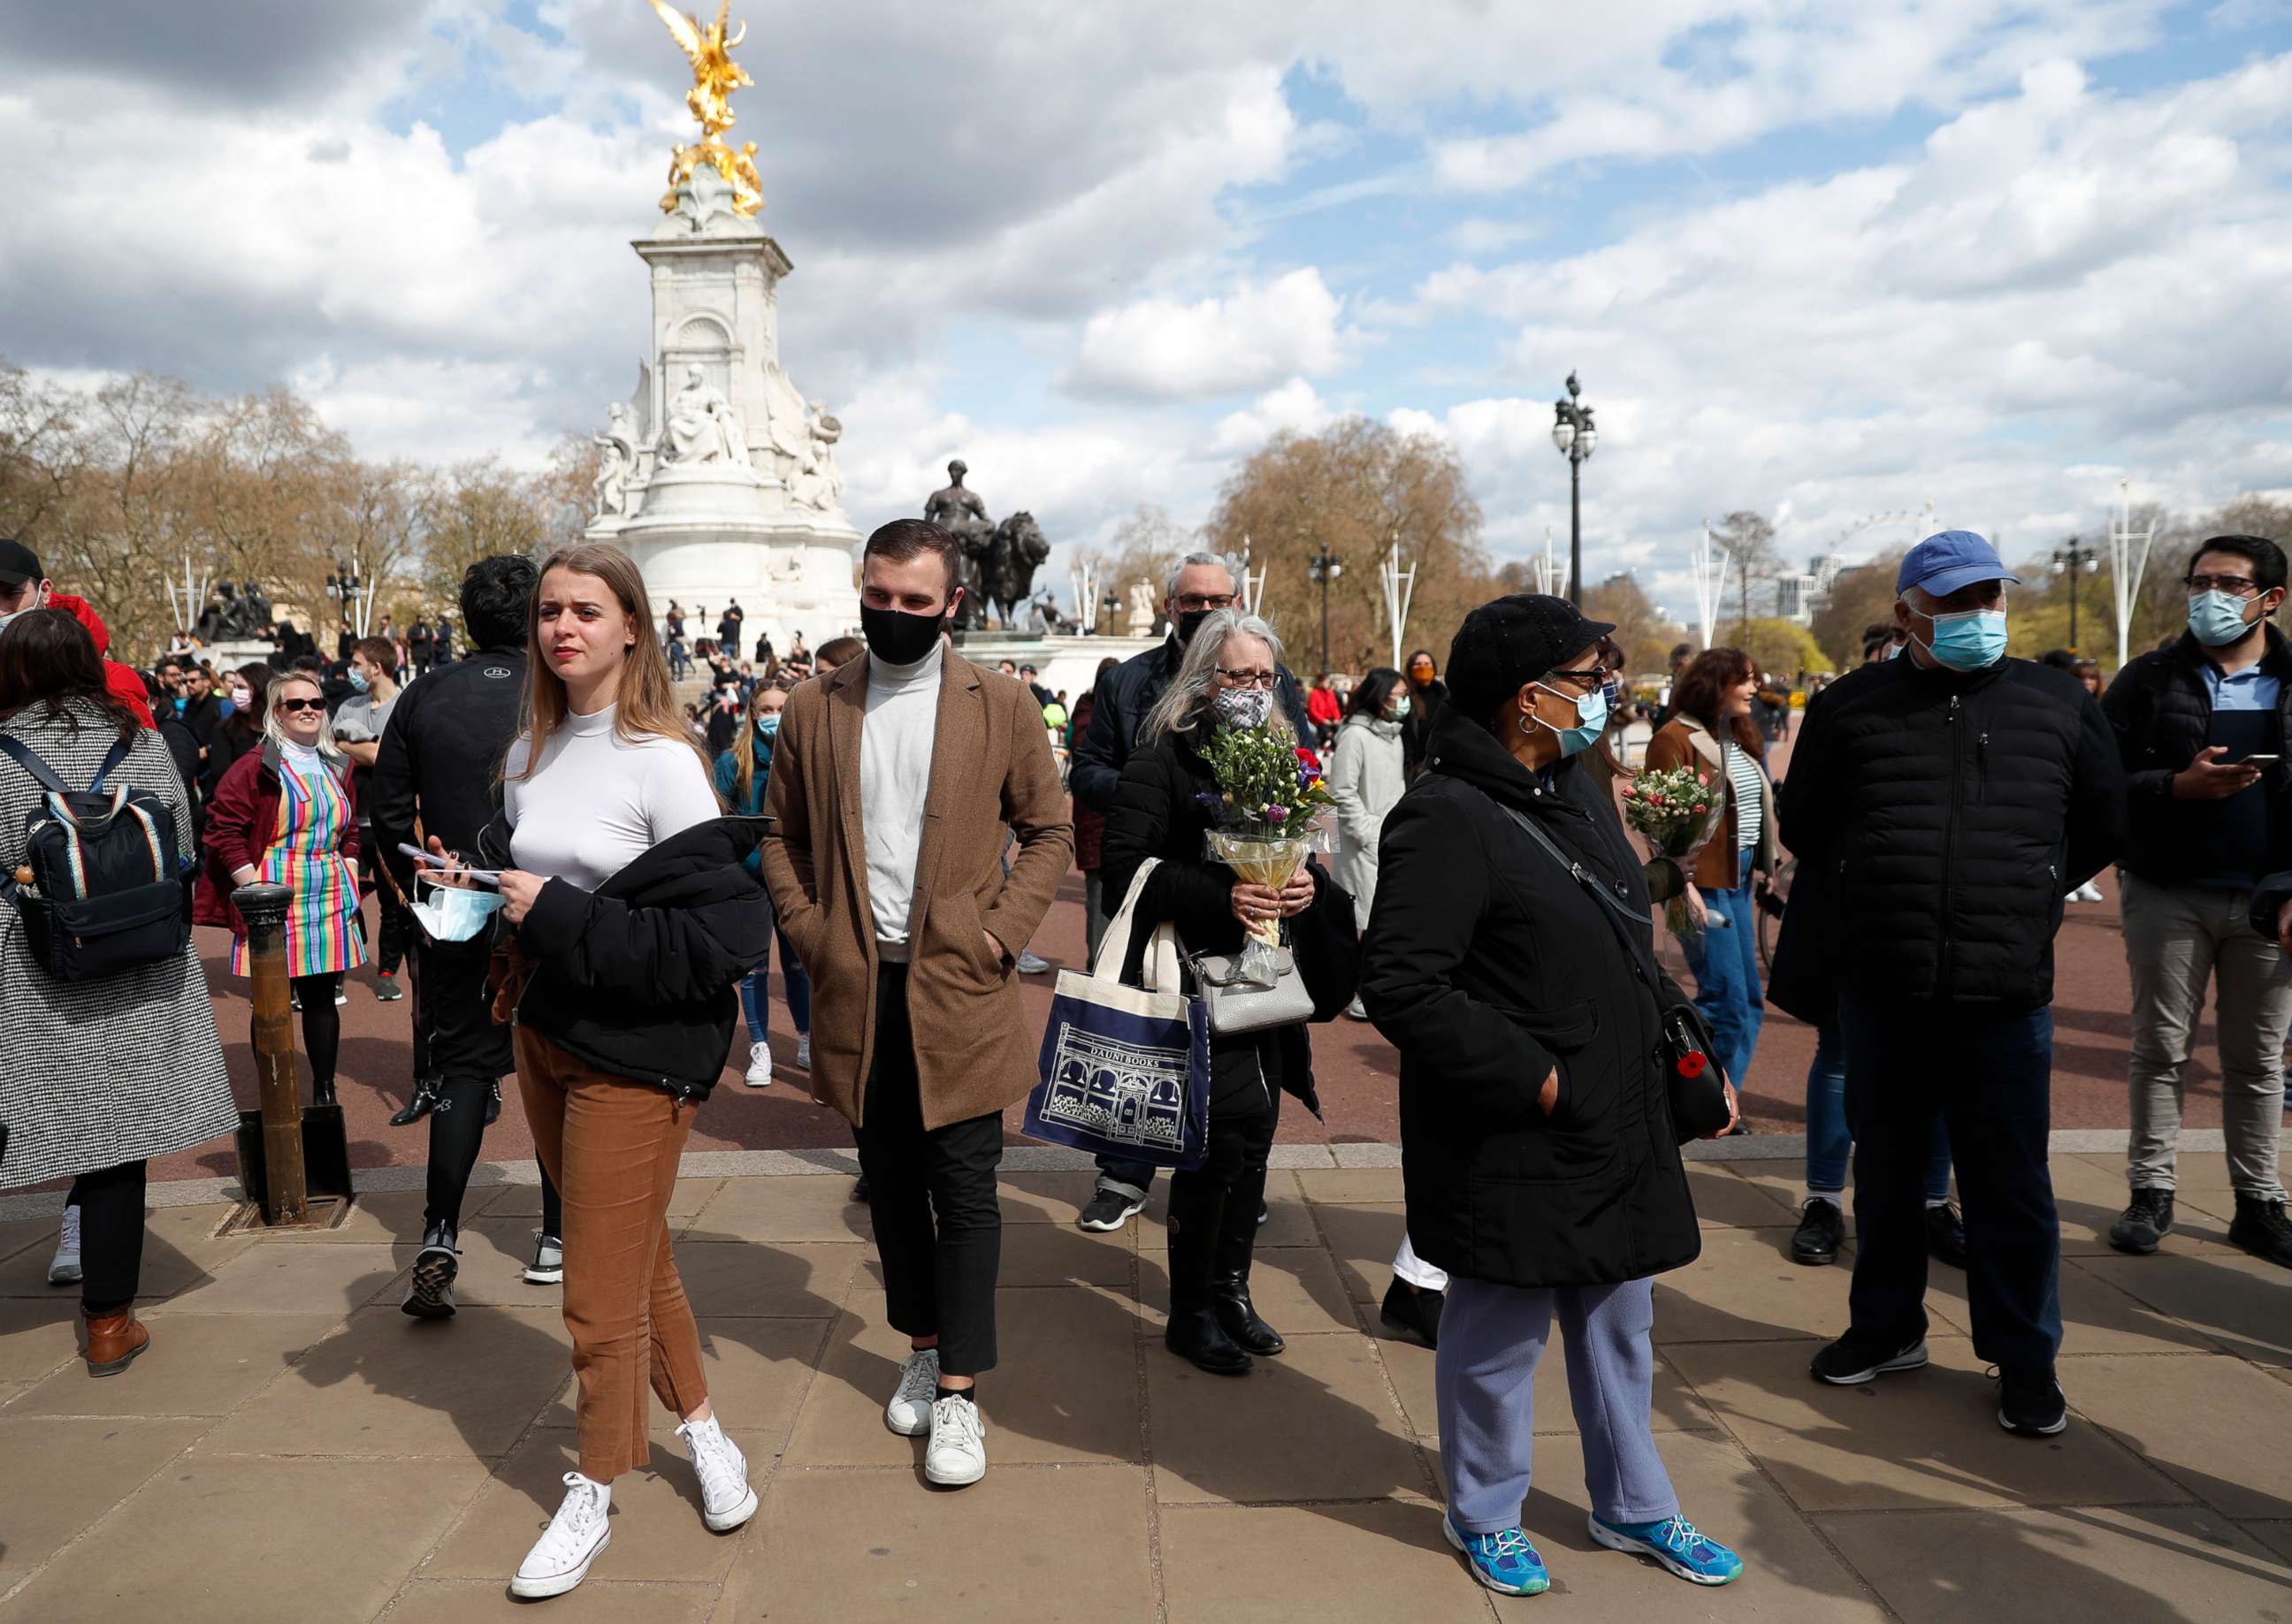 PHOTO: People gather in front of Buckingham Palace in London after the announcement of the death of Britain's Prince Philip, April 9, 2021.